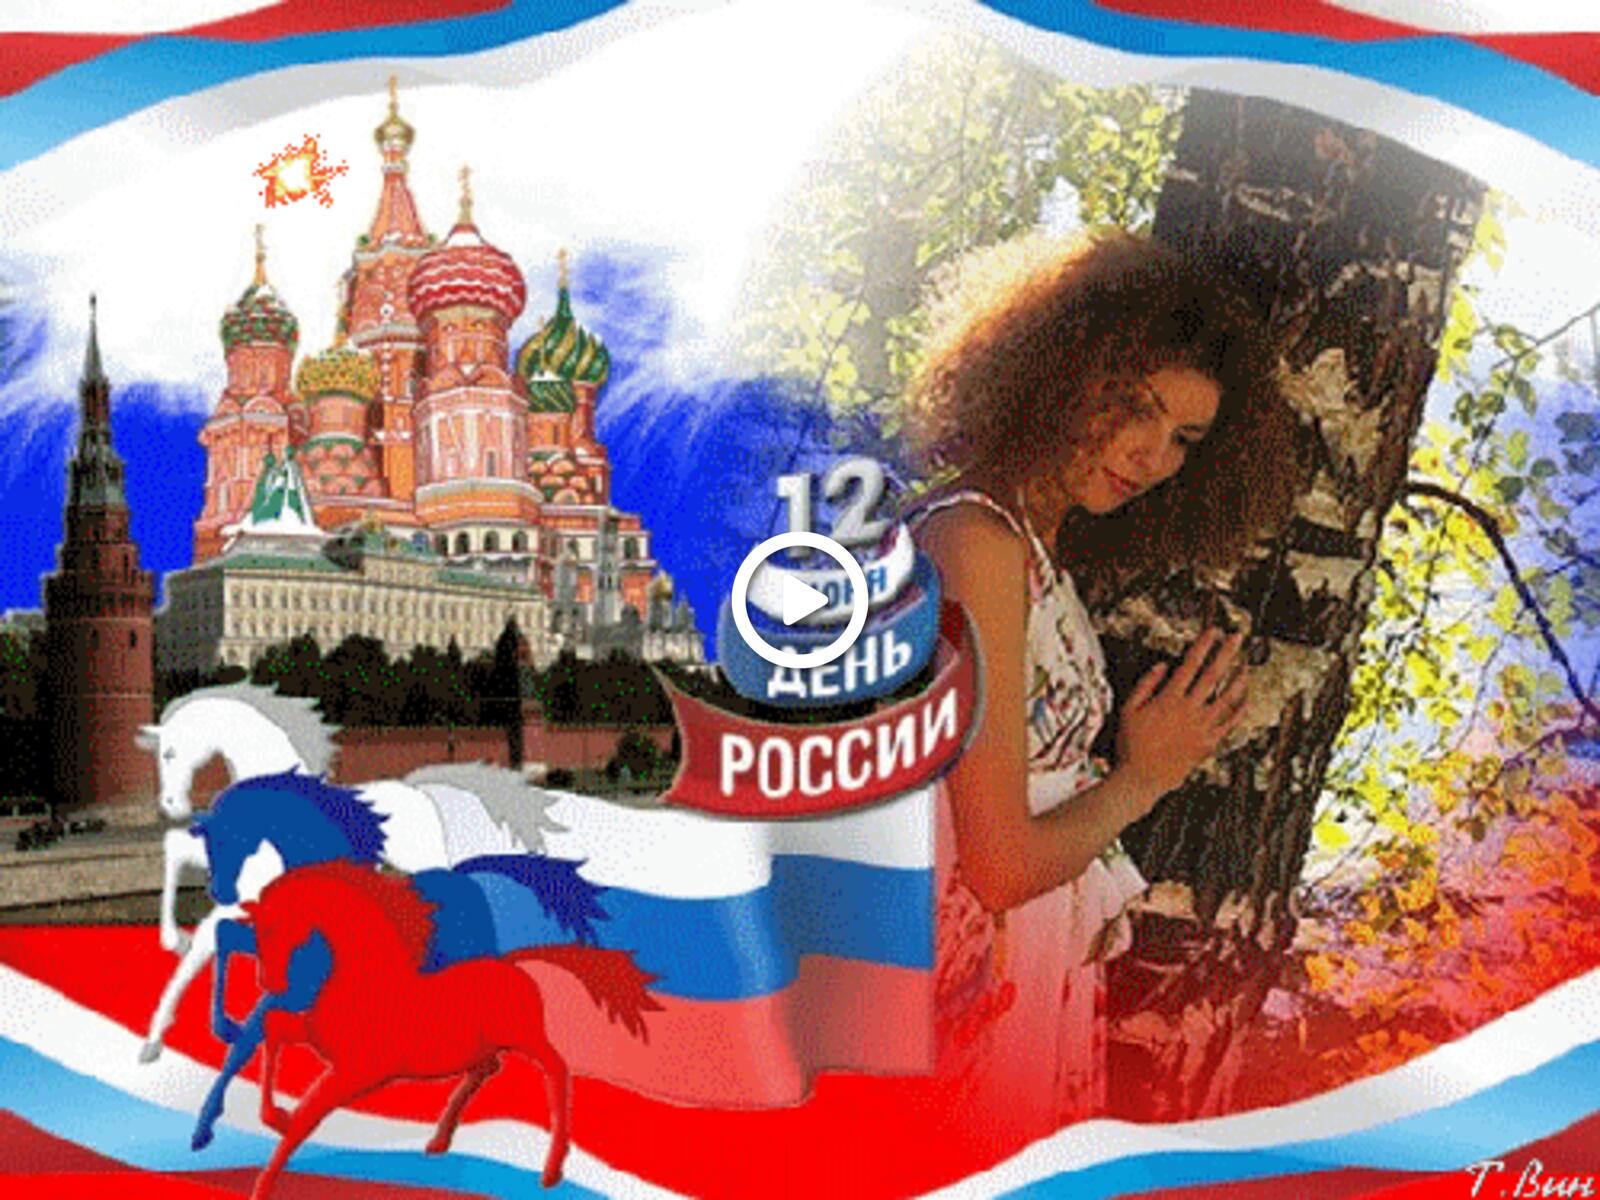 Postcard with the image of the Kremlin on Russia Day